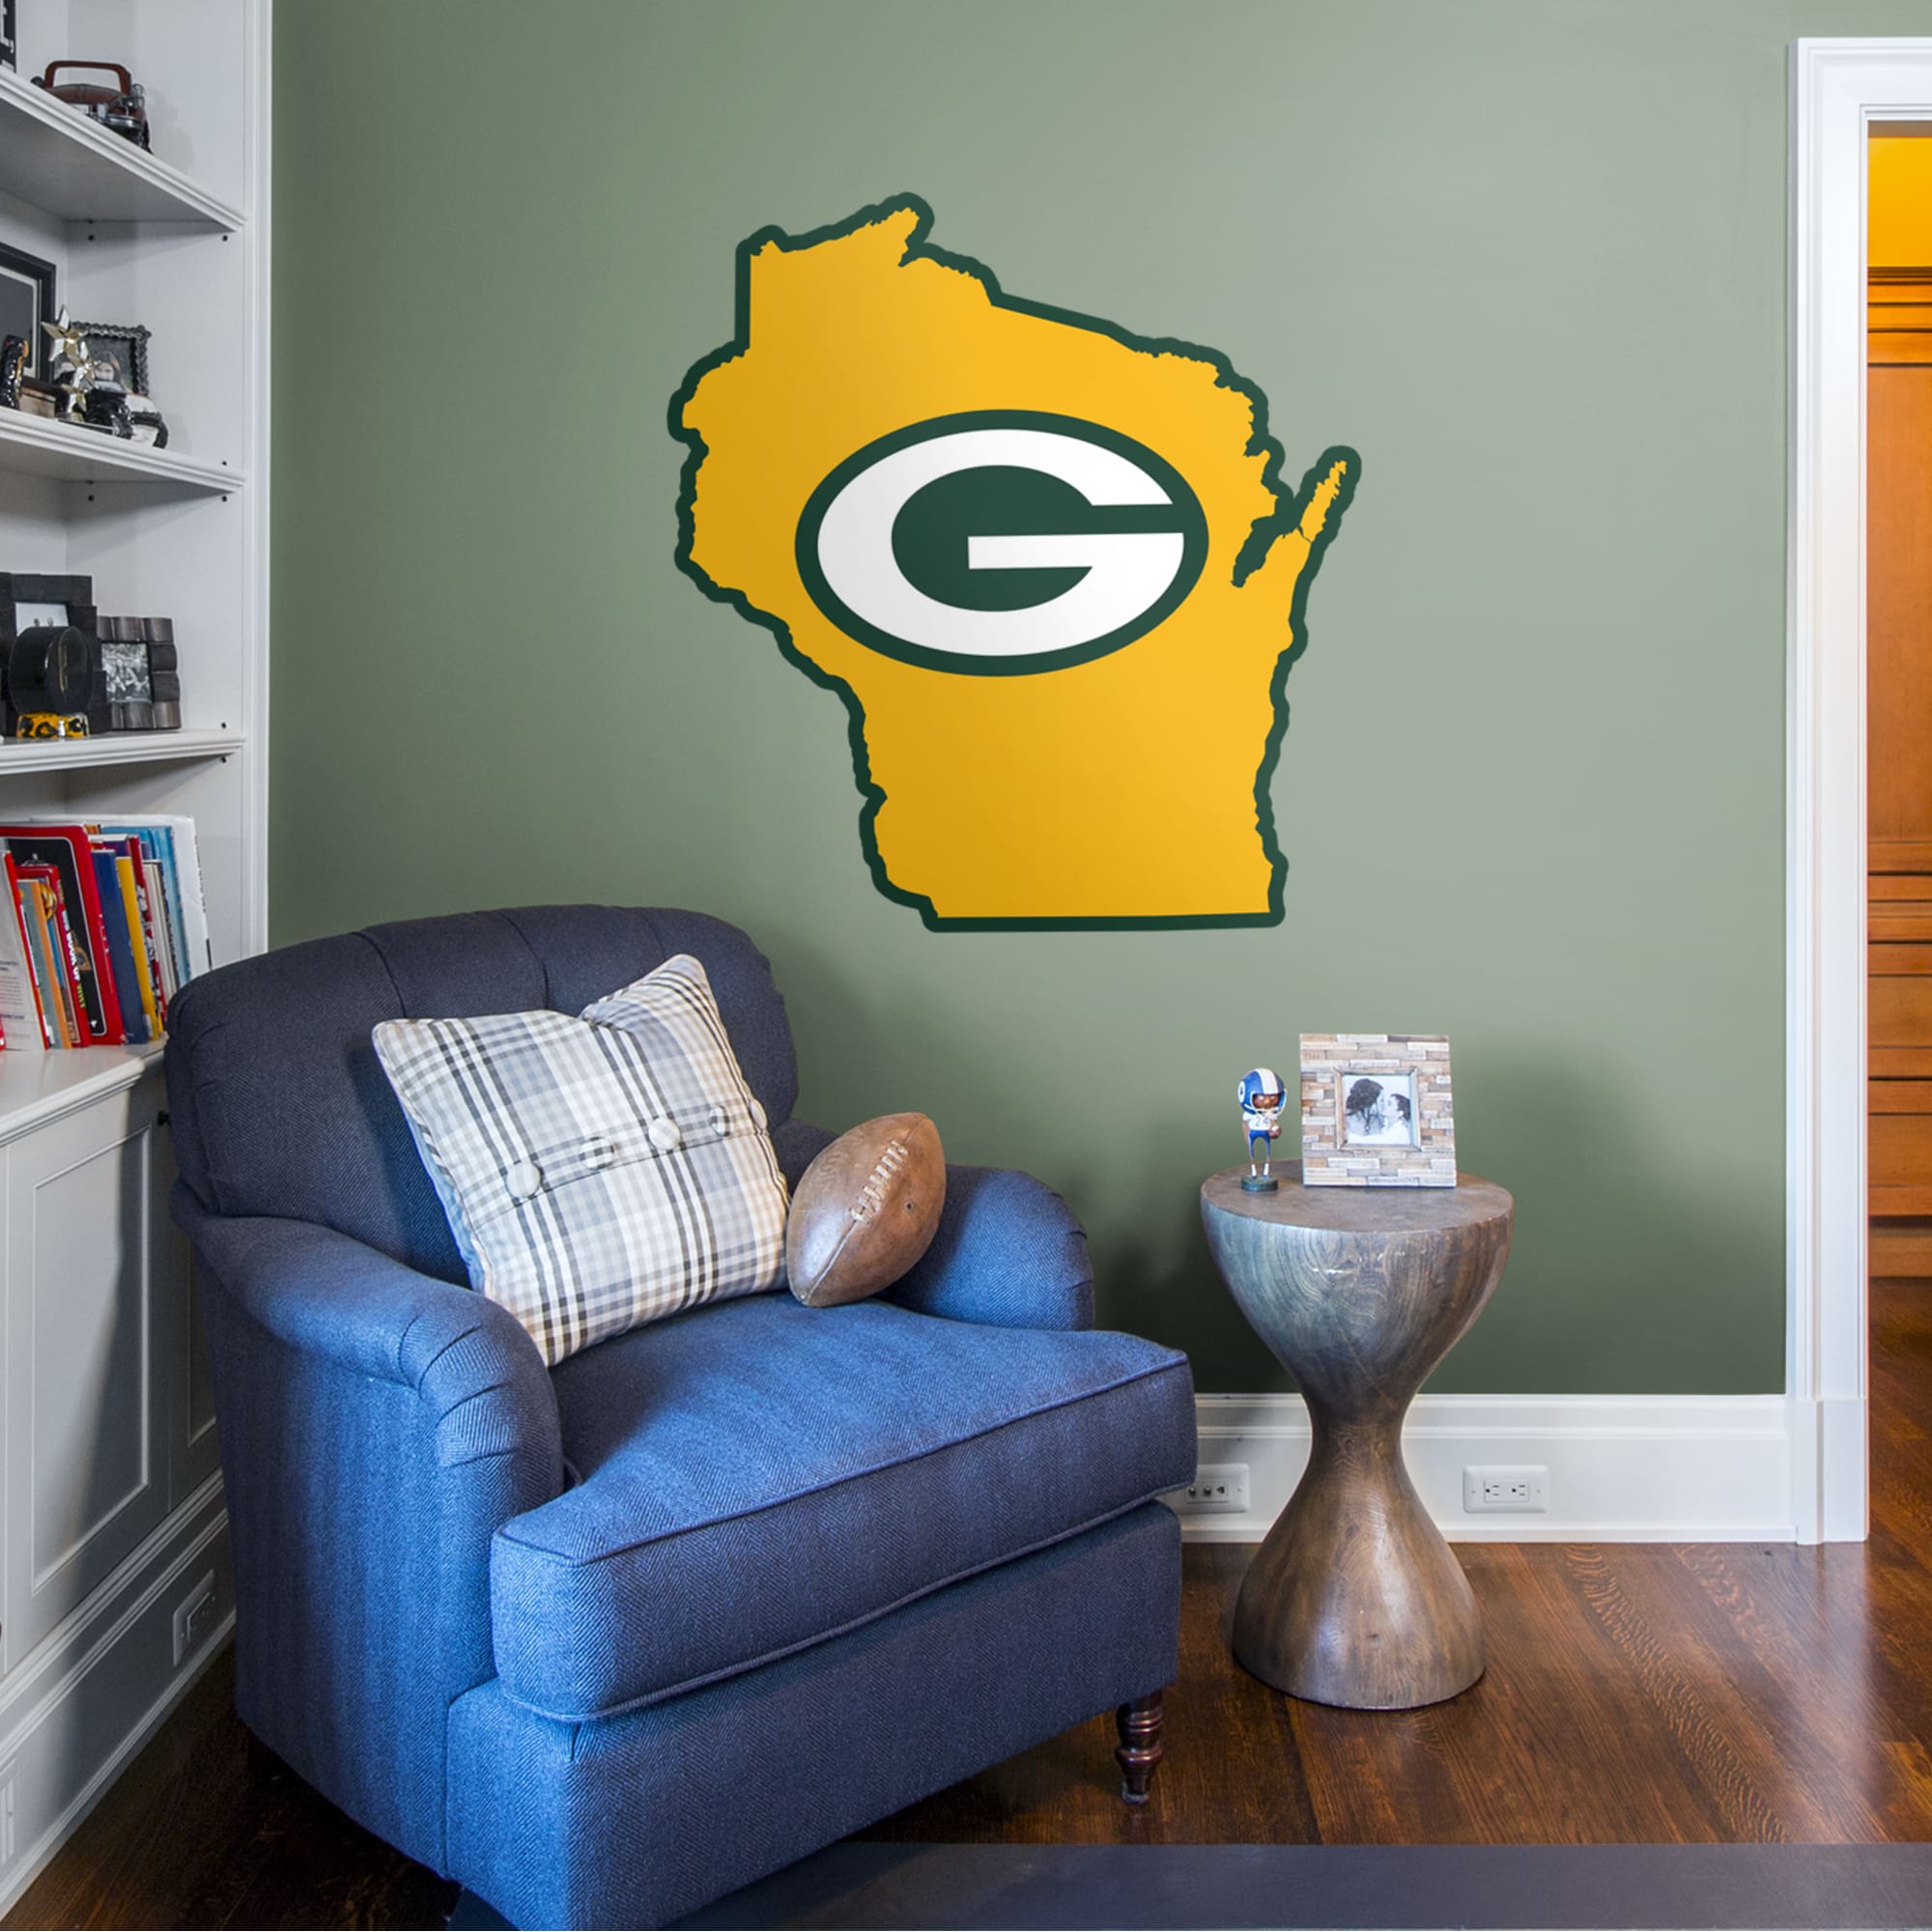 Green Bay Packers: State of Wisconsin - Officially Licensed NFL Removable Wall Decal 40.0"W x 43.0"H by Fathead | Vinyl